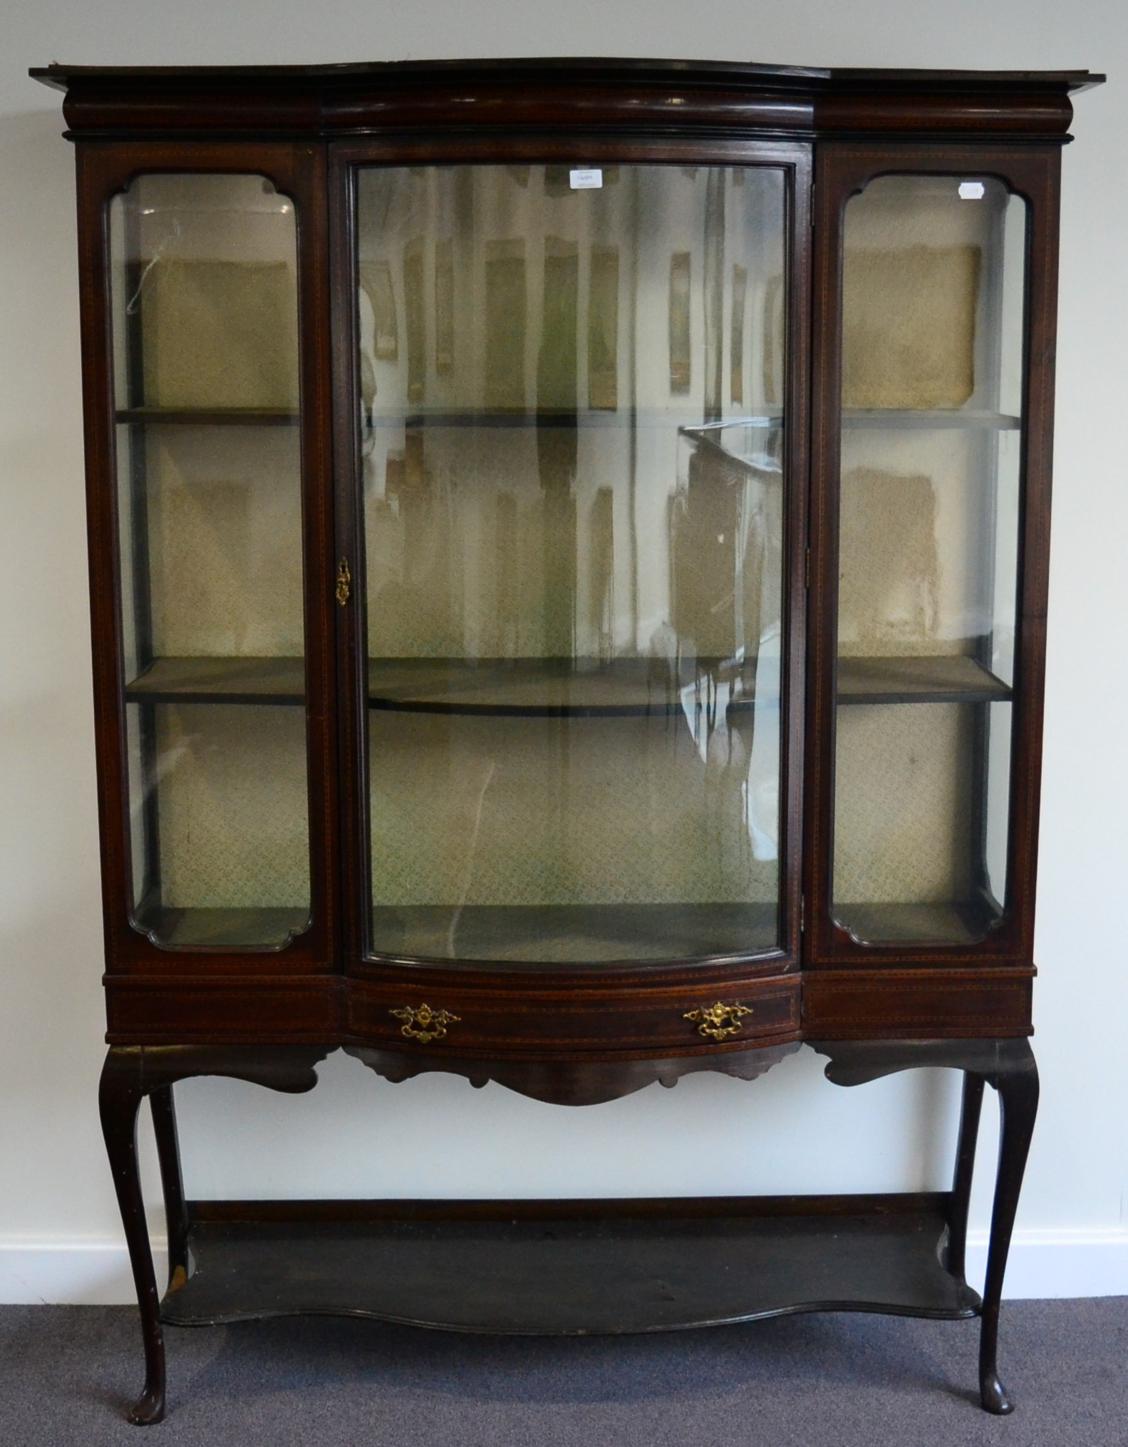 An Edwardian Mahogany and Barber's Pole Strung Display Cabinet, with central glazed door enclosing a